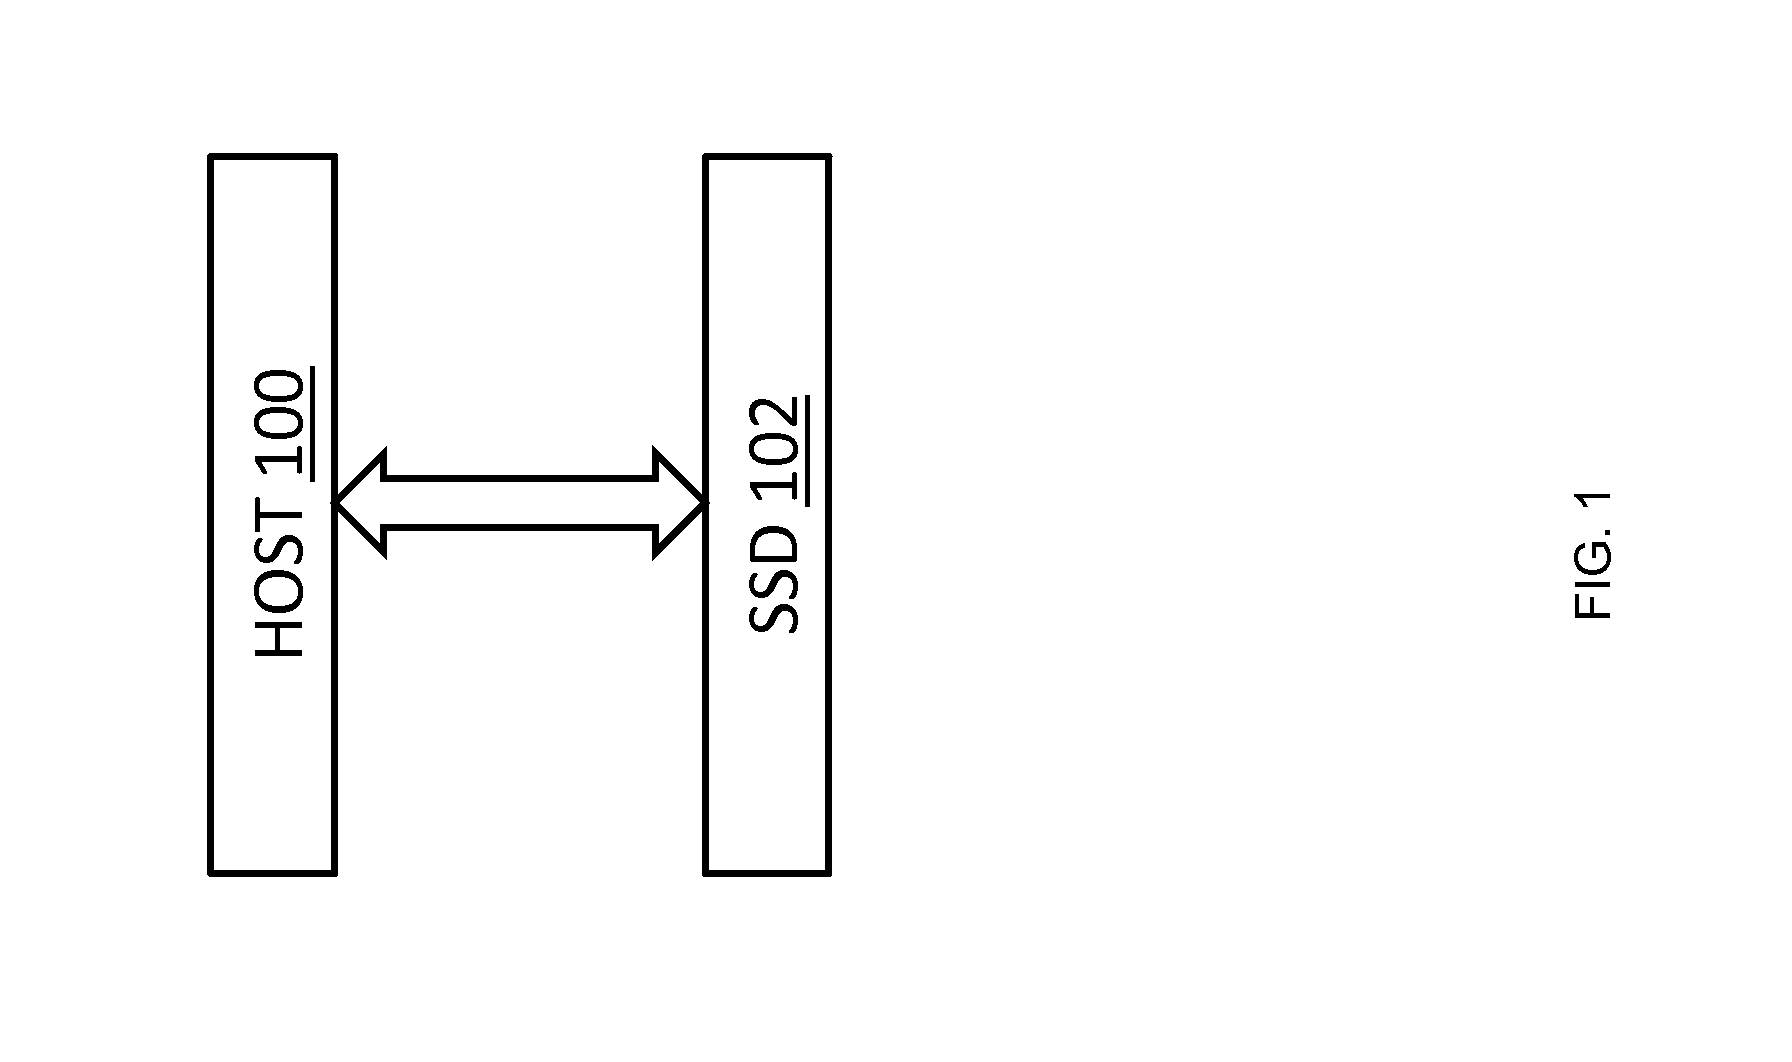 Multiple locality-based caching in a data storage system